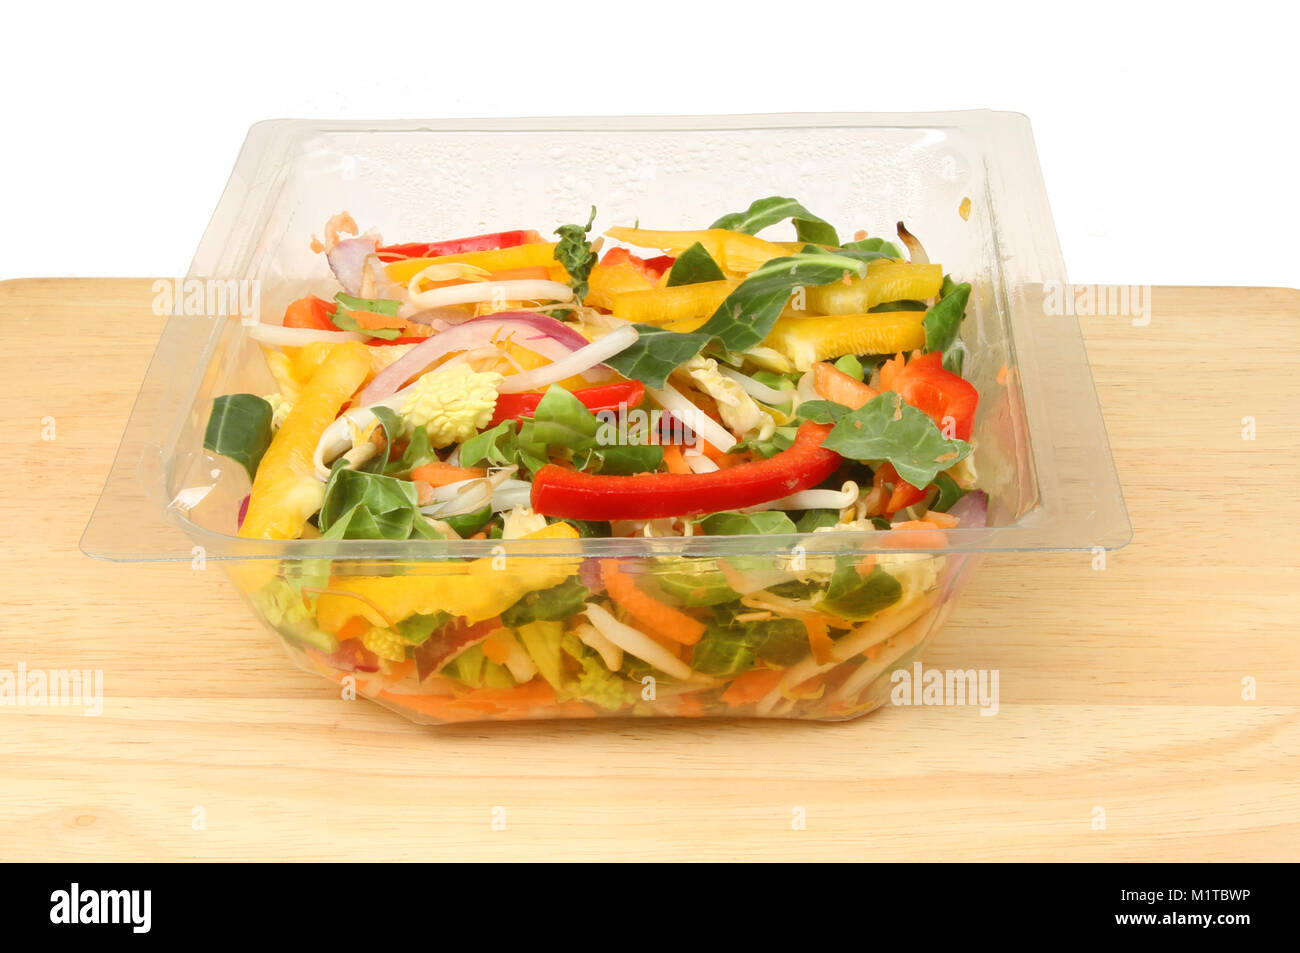 Stir fry vegetables in a plastic carton on a wooden chopping board against a white background Stock Photo